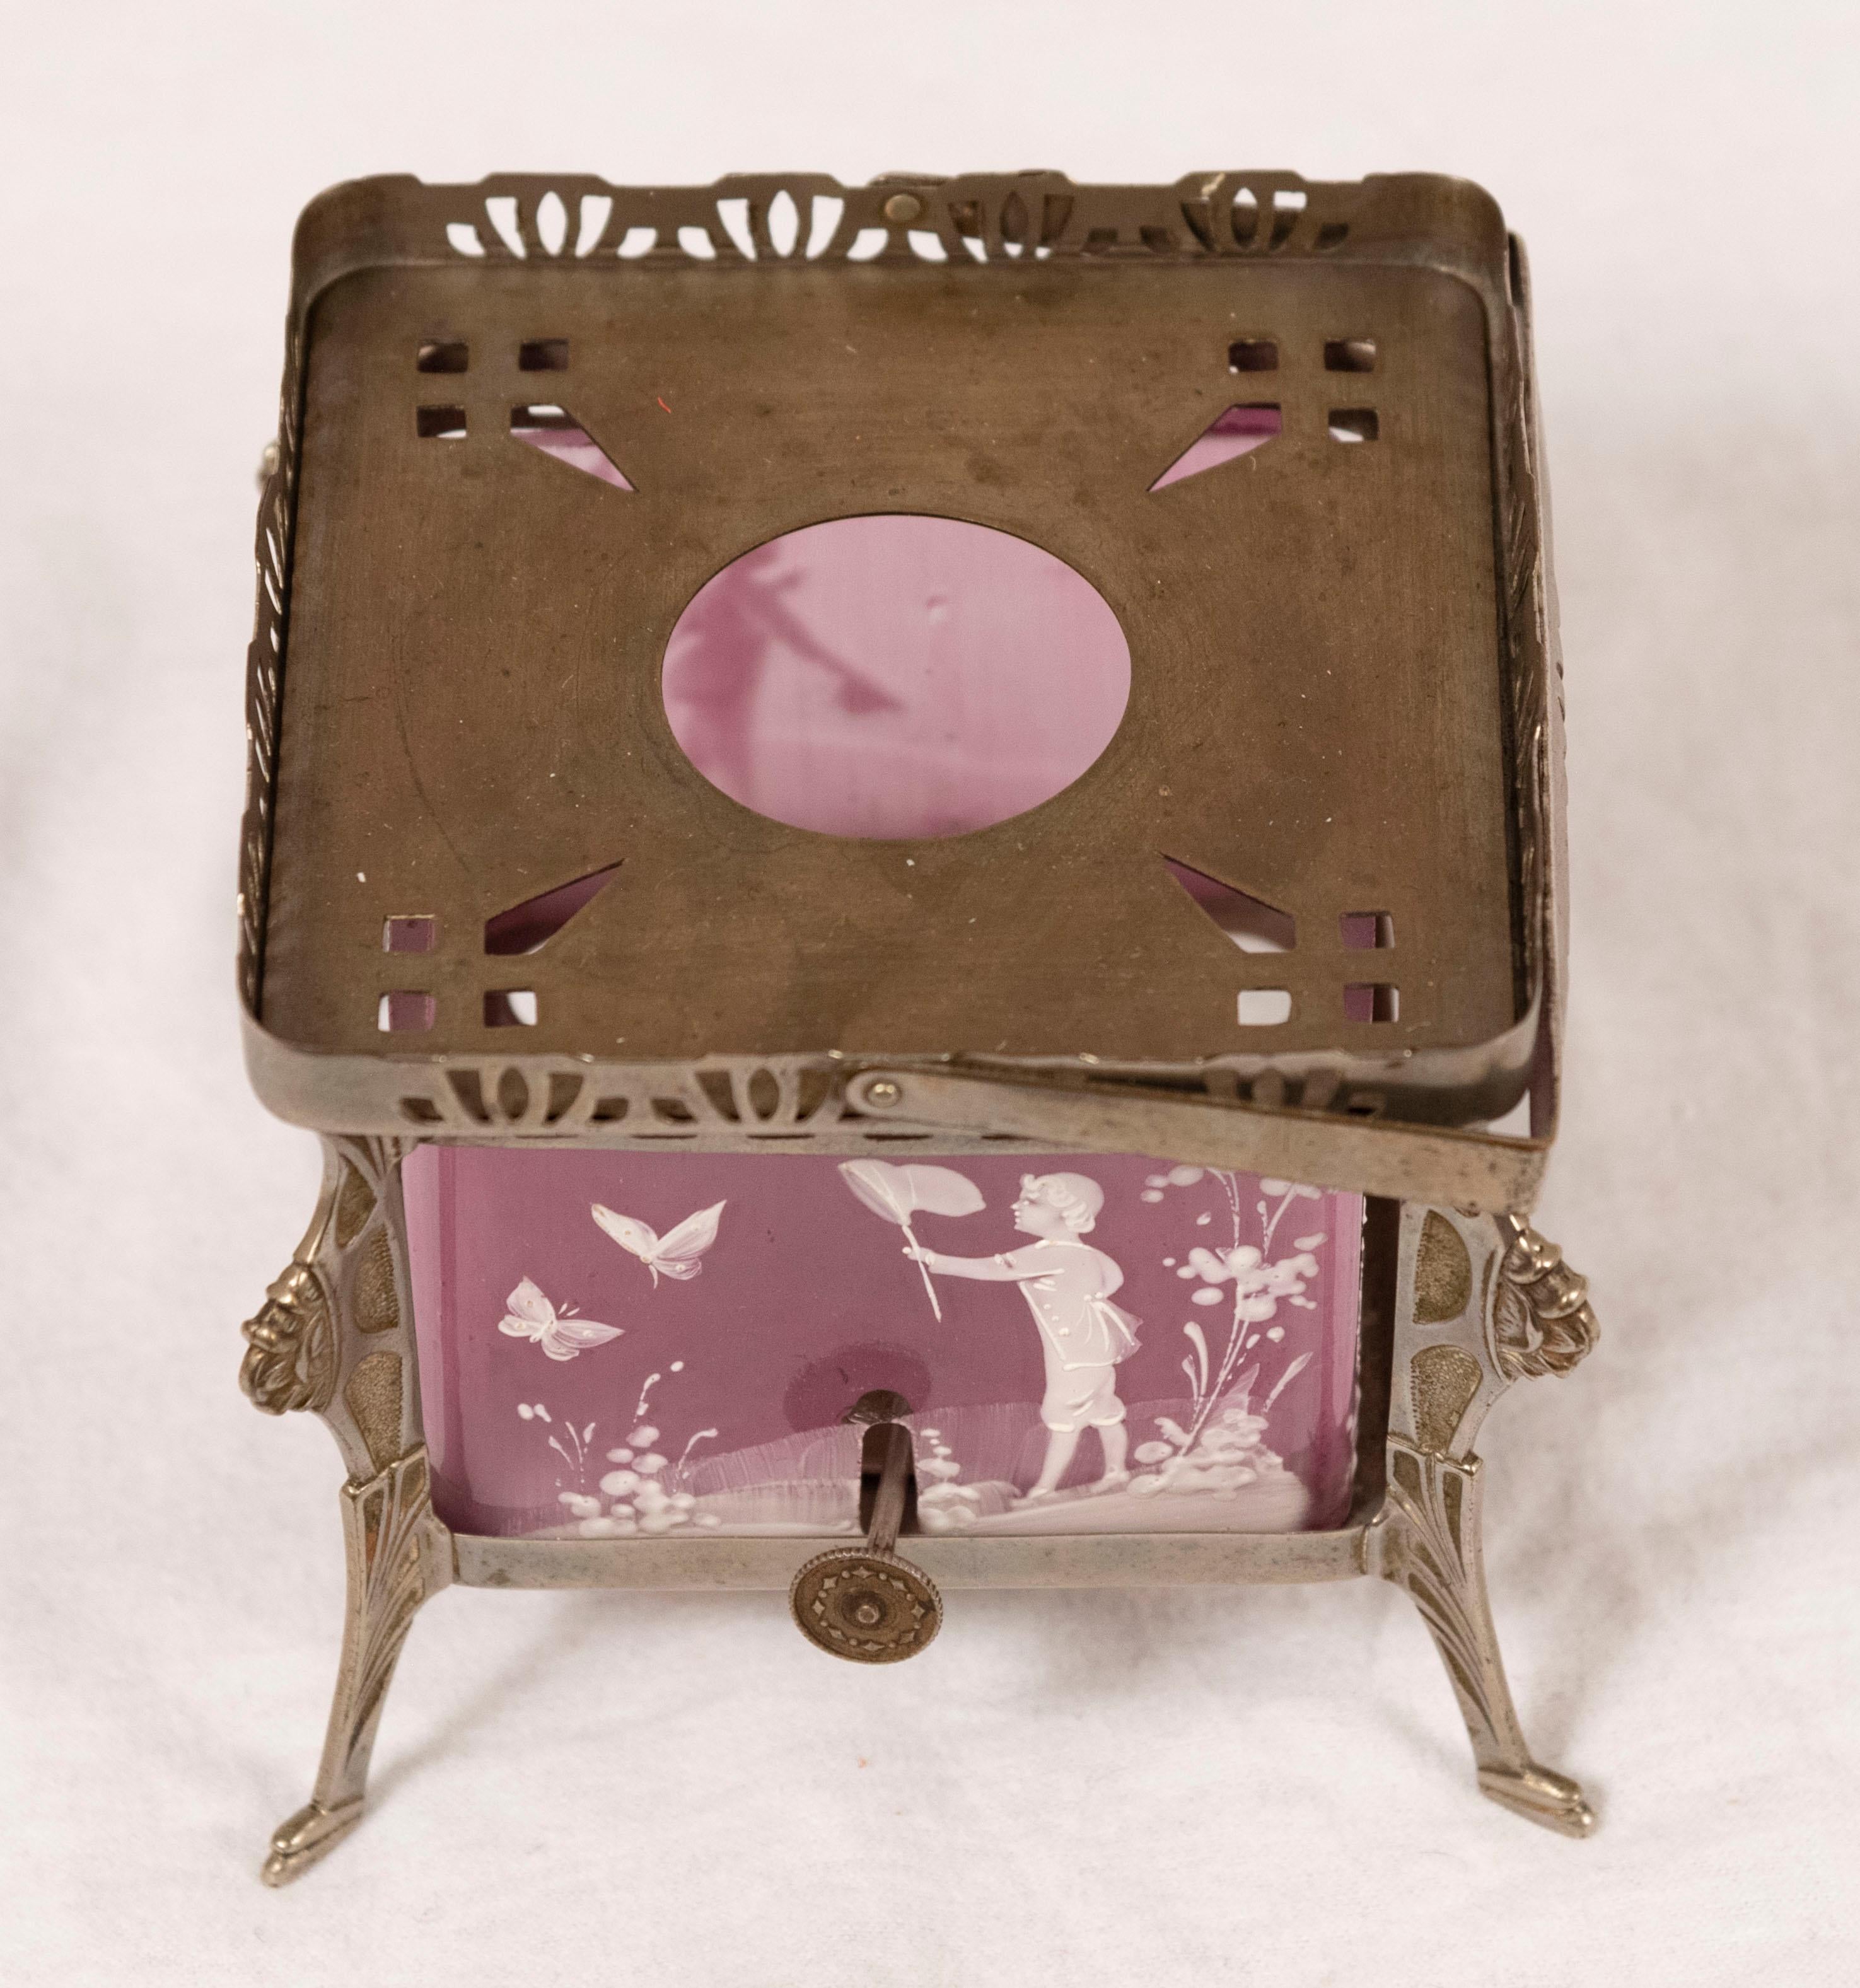 Mary Gregory (American, 1856-1908) pink tea warmer with painted art glass and silver plate

Measures: 4.5 x 5 x 5 inches.